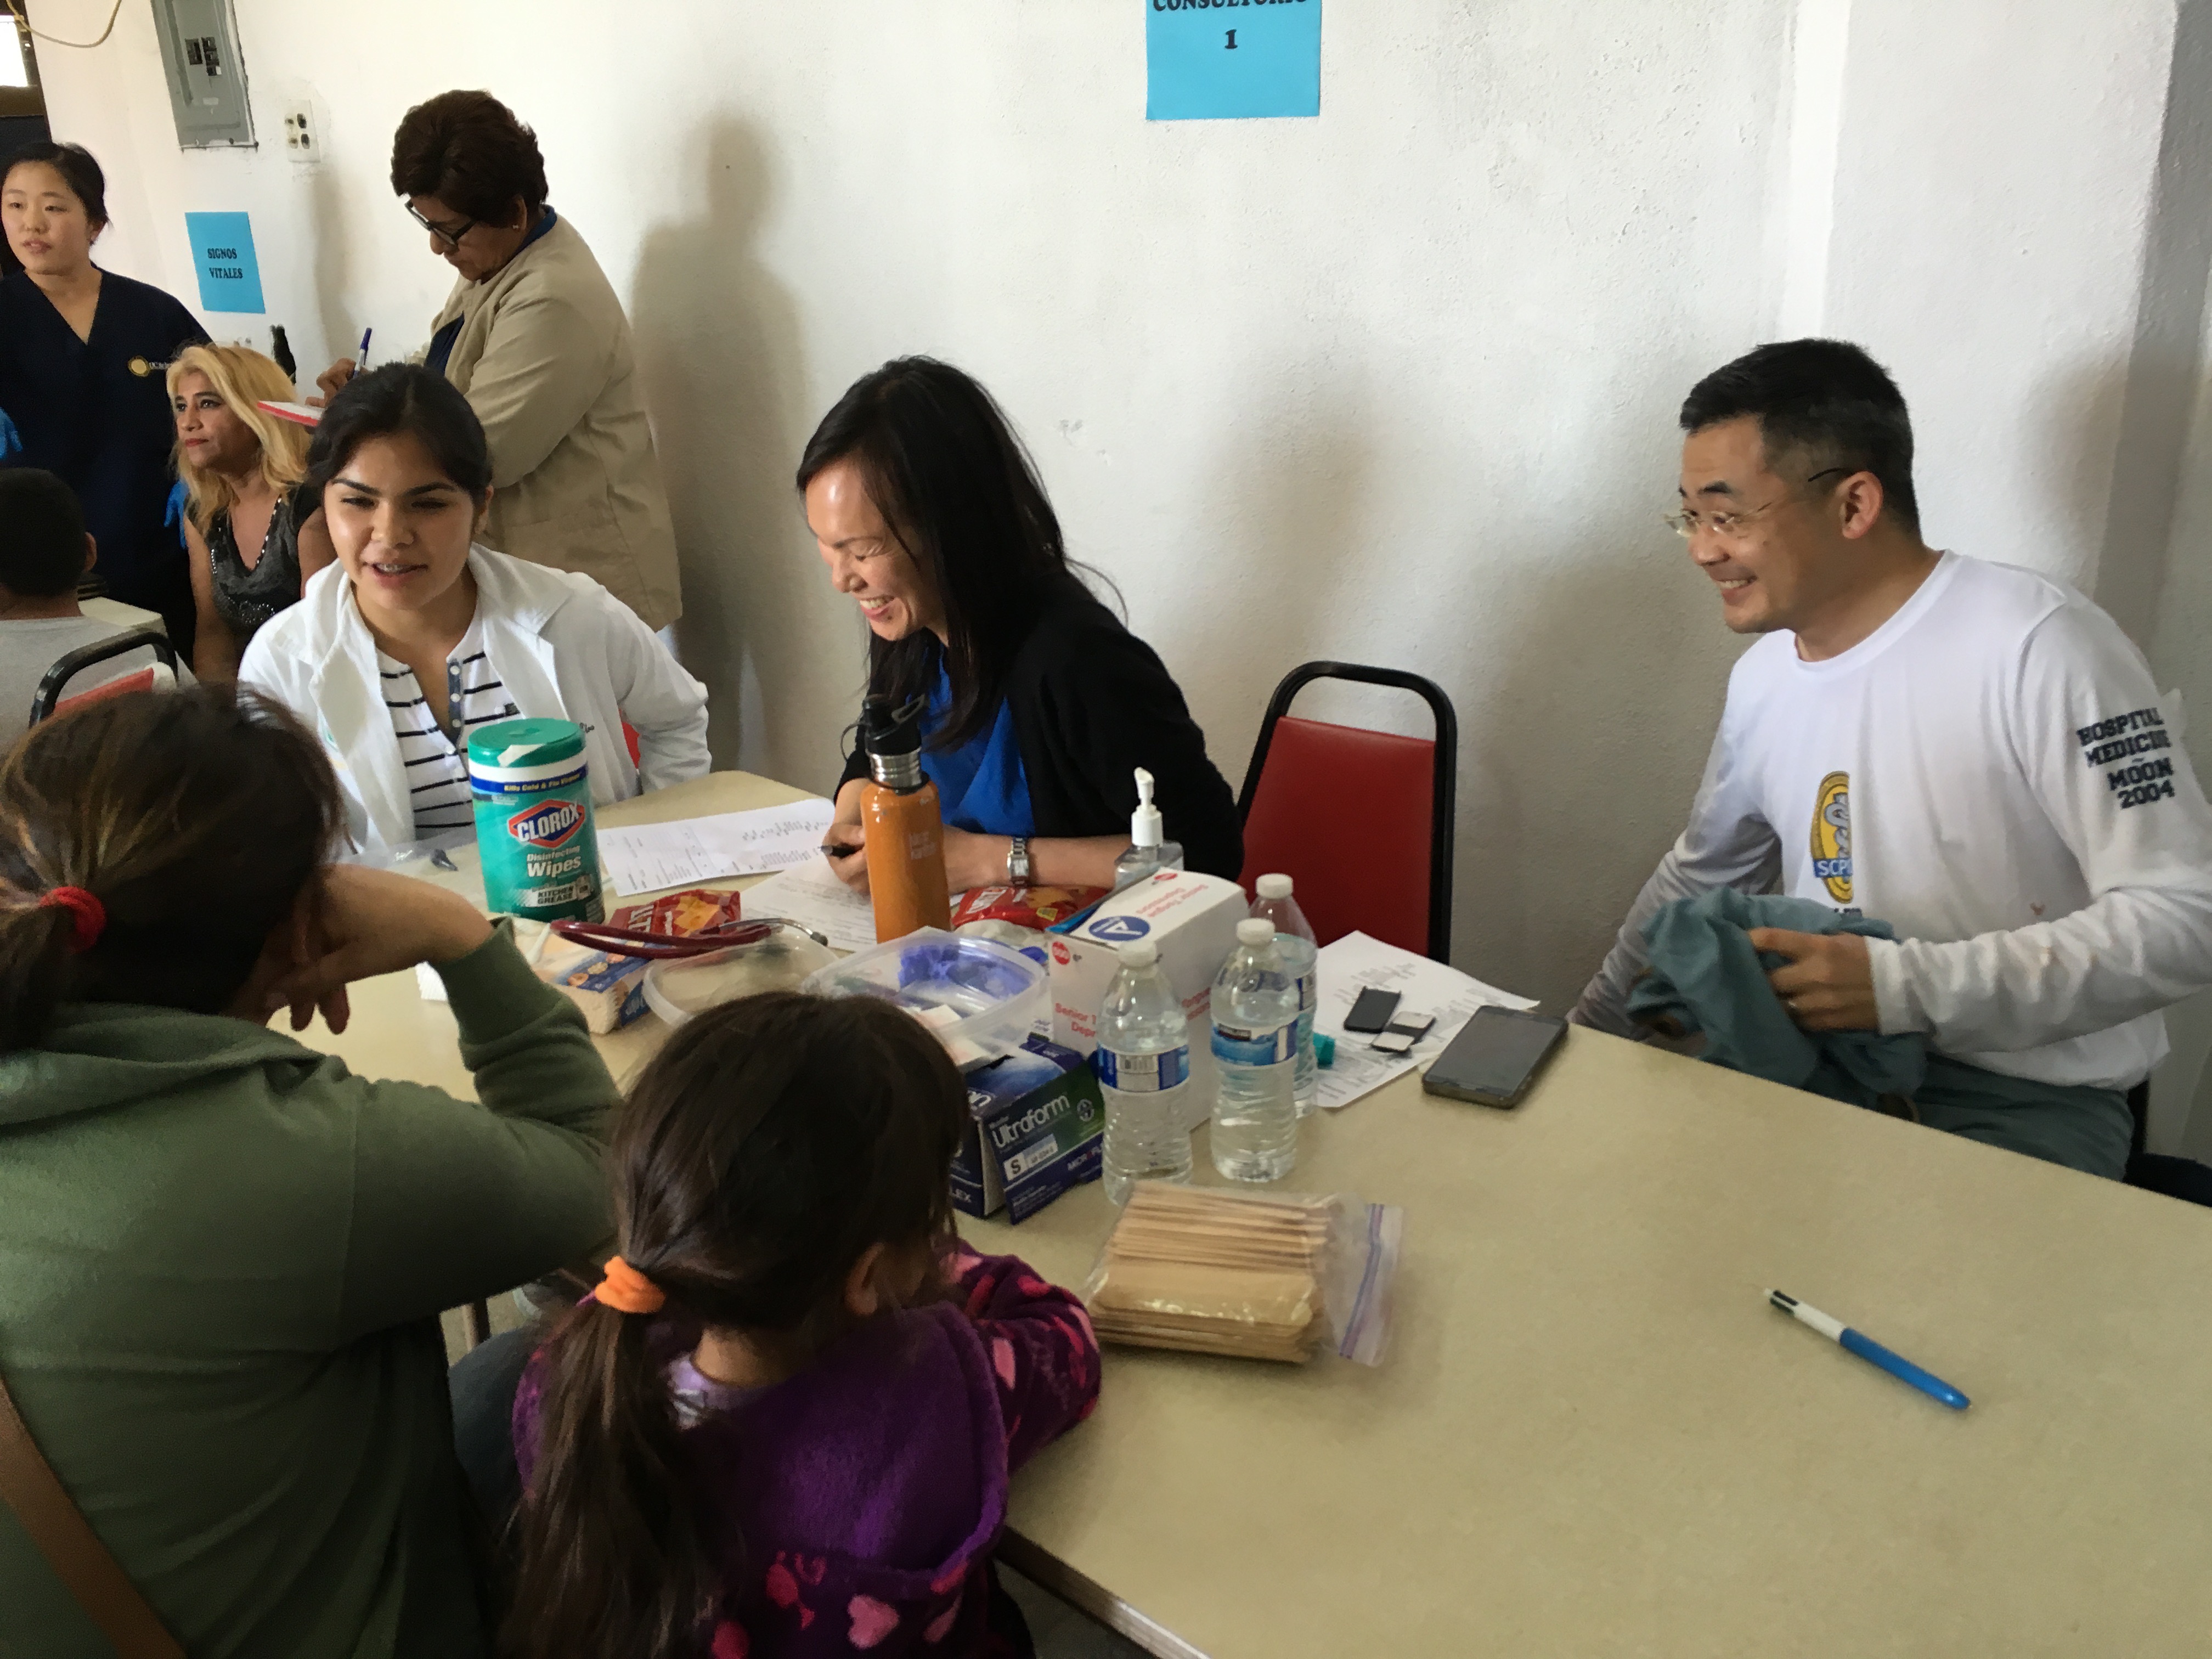 Sharing the love of Christ in a tangible way through the medical clinic